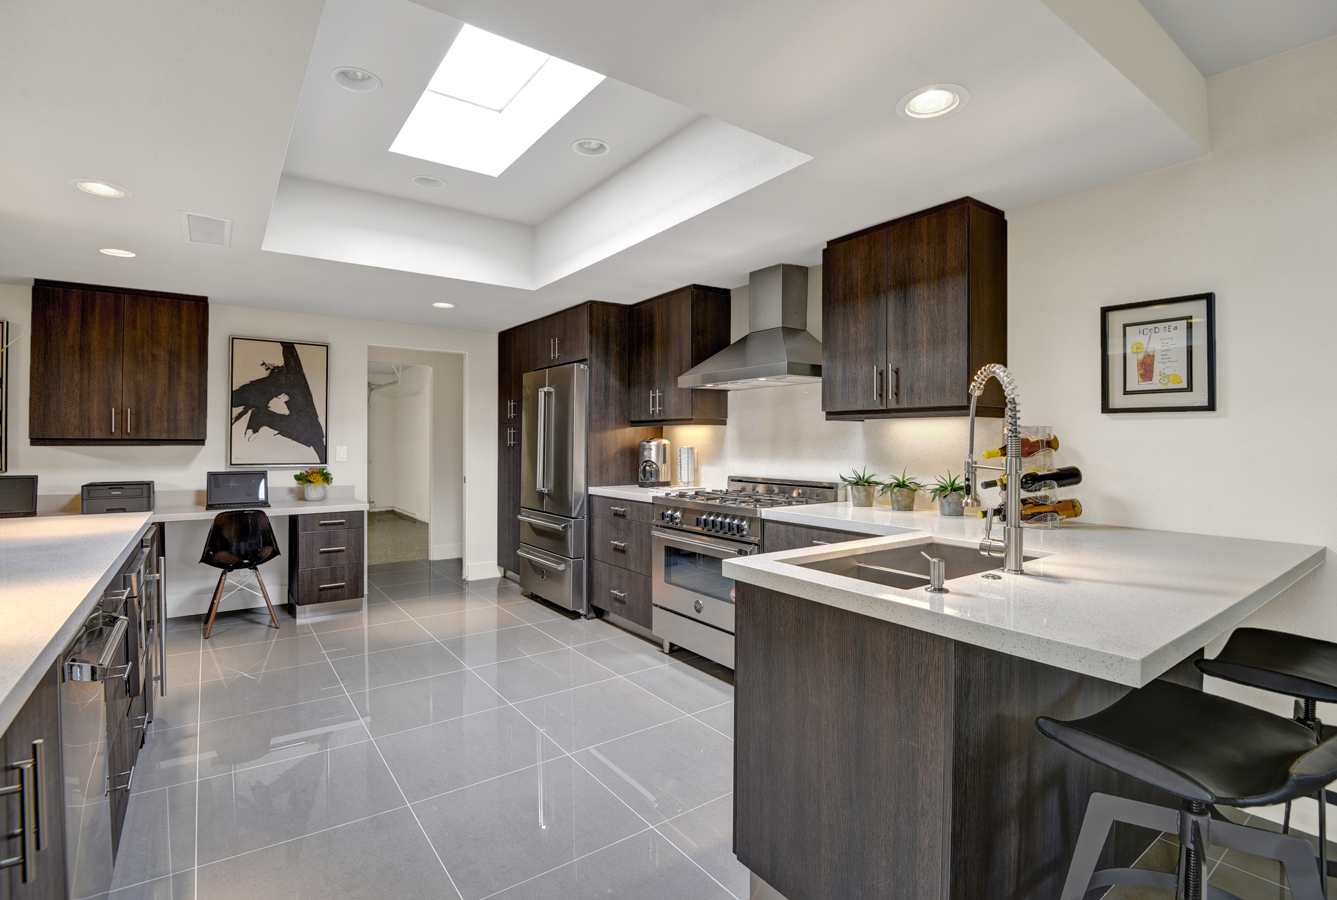 A kitchen with stainless steel appliances , wooden cabinets , a sink , and a skylight.